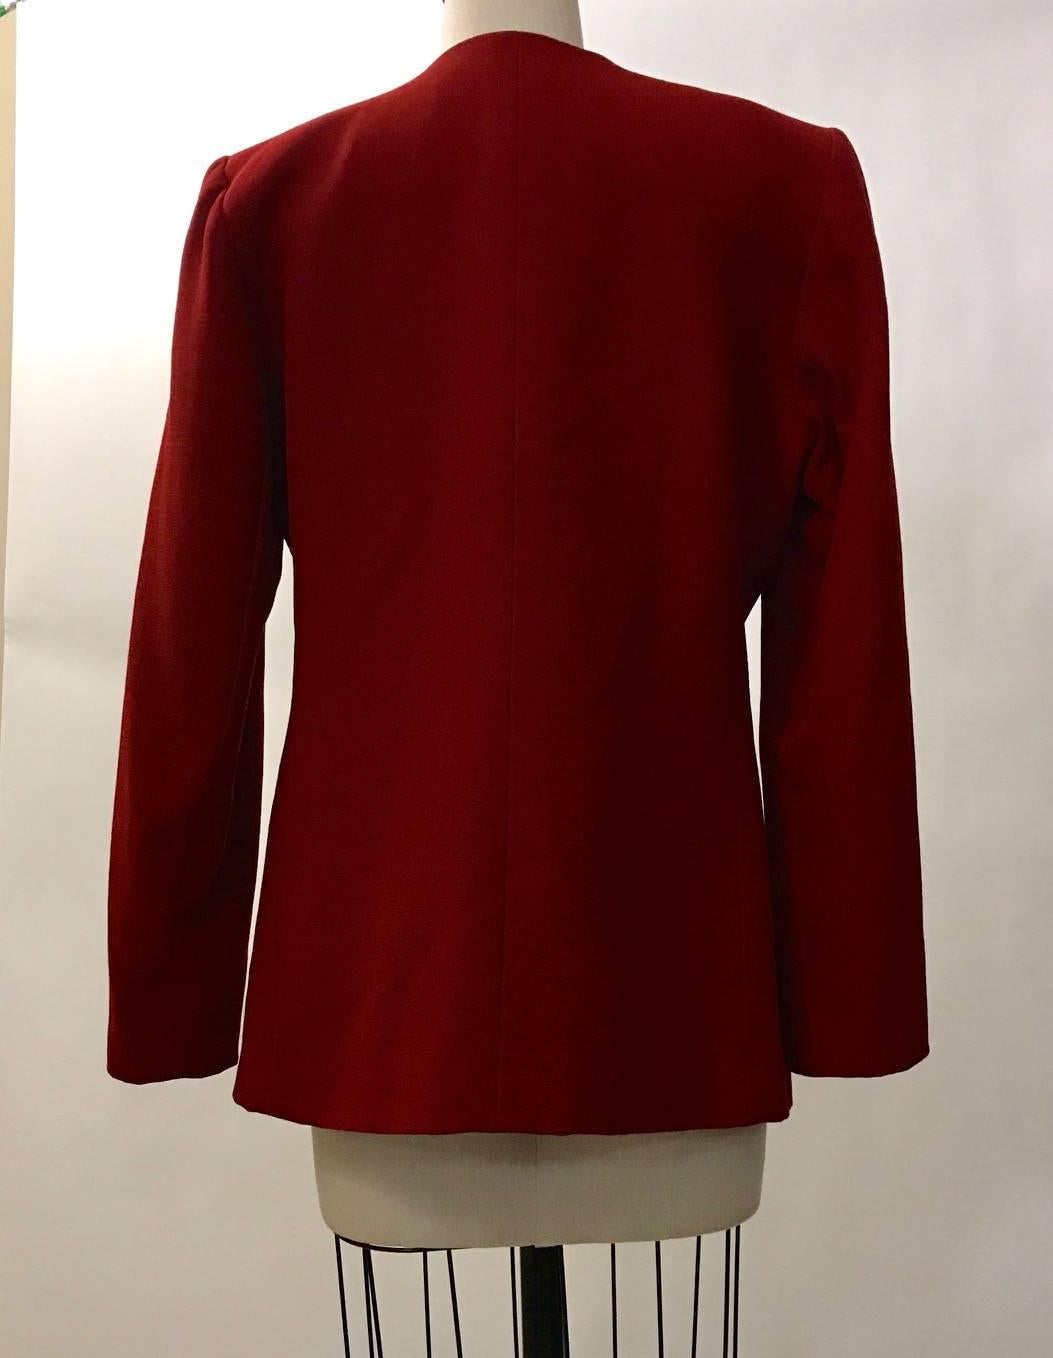 Yves Saint Laurent Encore mid 1990's deep cherry/burgandy red blazer with textured black panels and single frog closure at front. 

No content tag. Possibly a very light wool blend.
Fully lined.

Made in France.

Labelled size FR 38, US 6. See